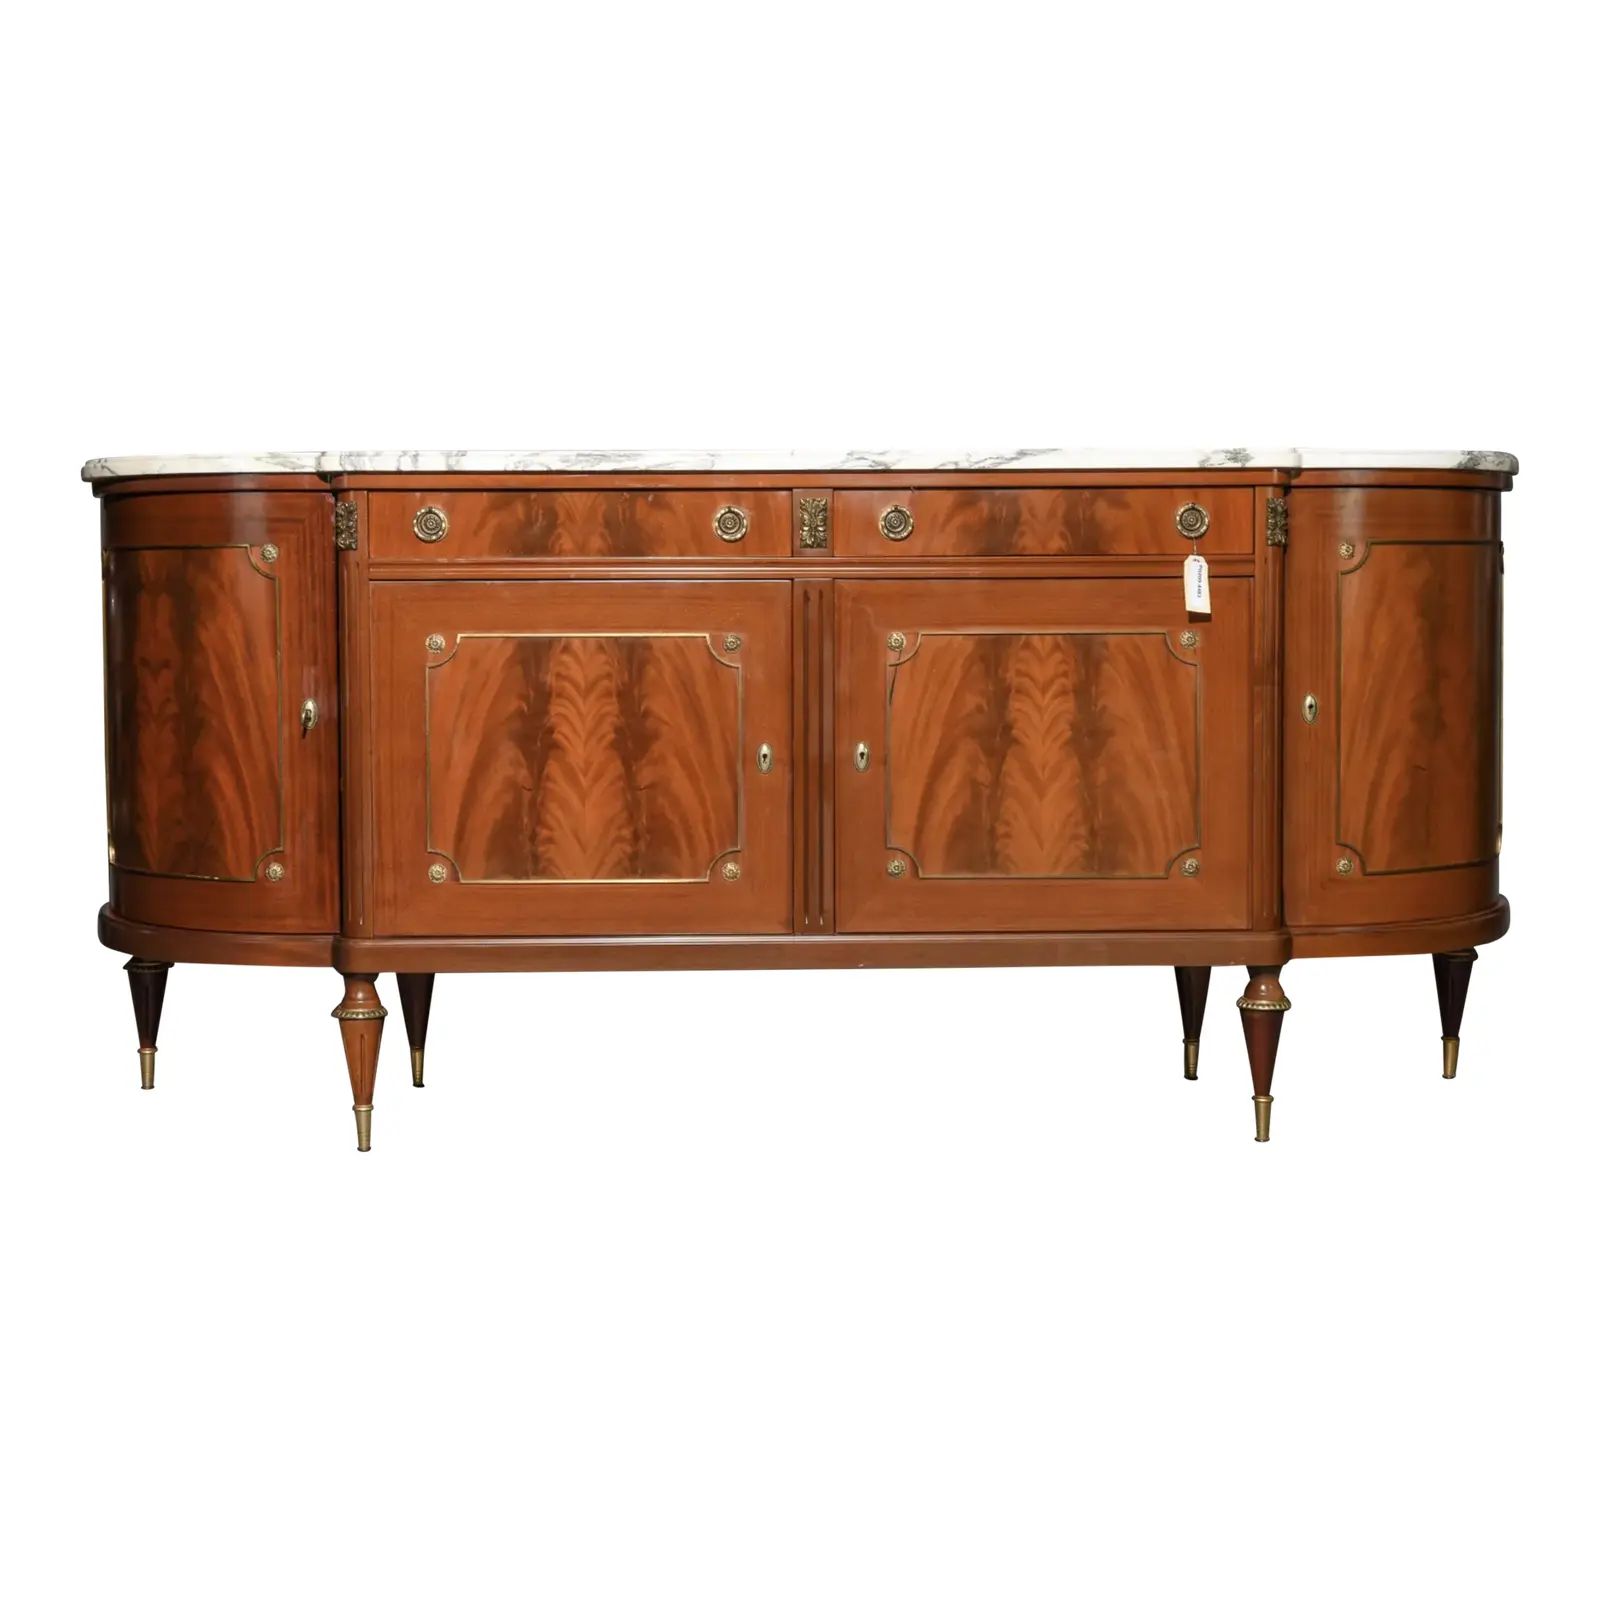 Louis XVI Style White Marble Top Mahogany Sideboard Credenza Enfilade | Chairish